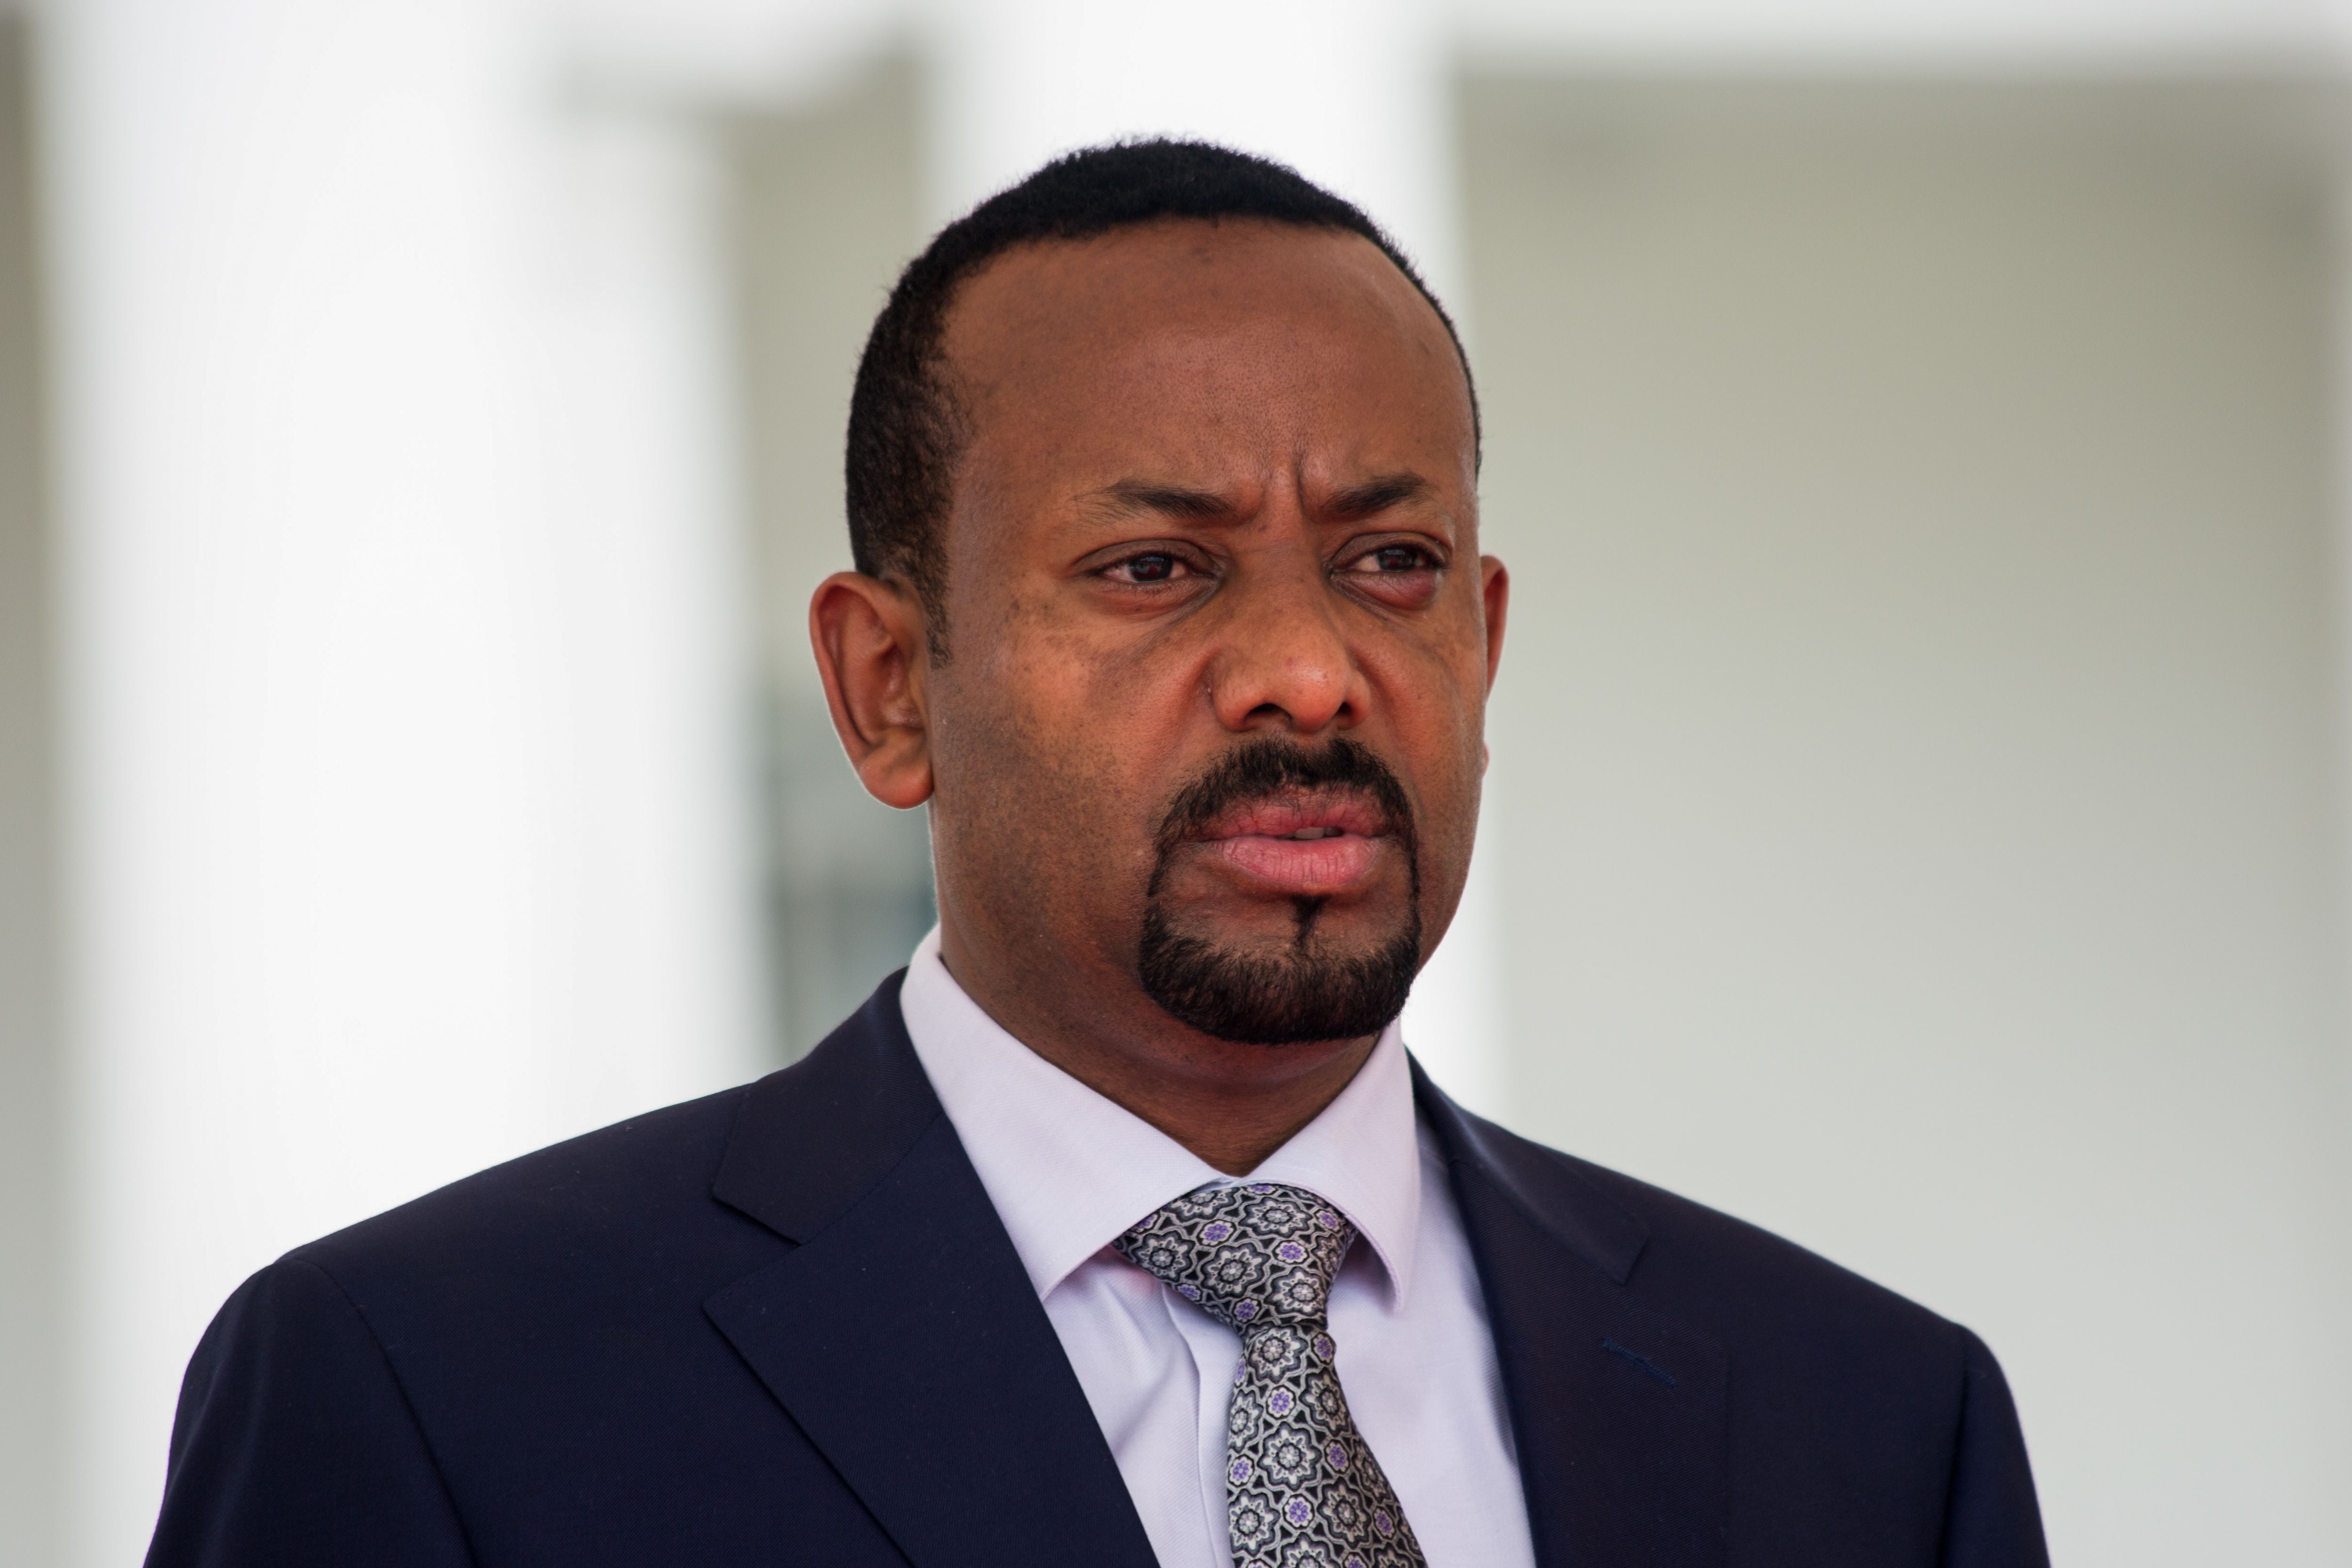 Prime Minister Abiy Ahmed won a Nobel Peace prize in 2019